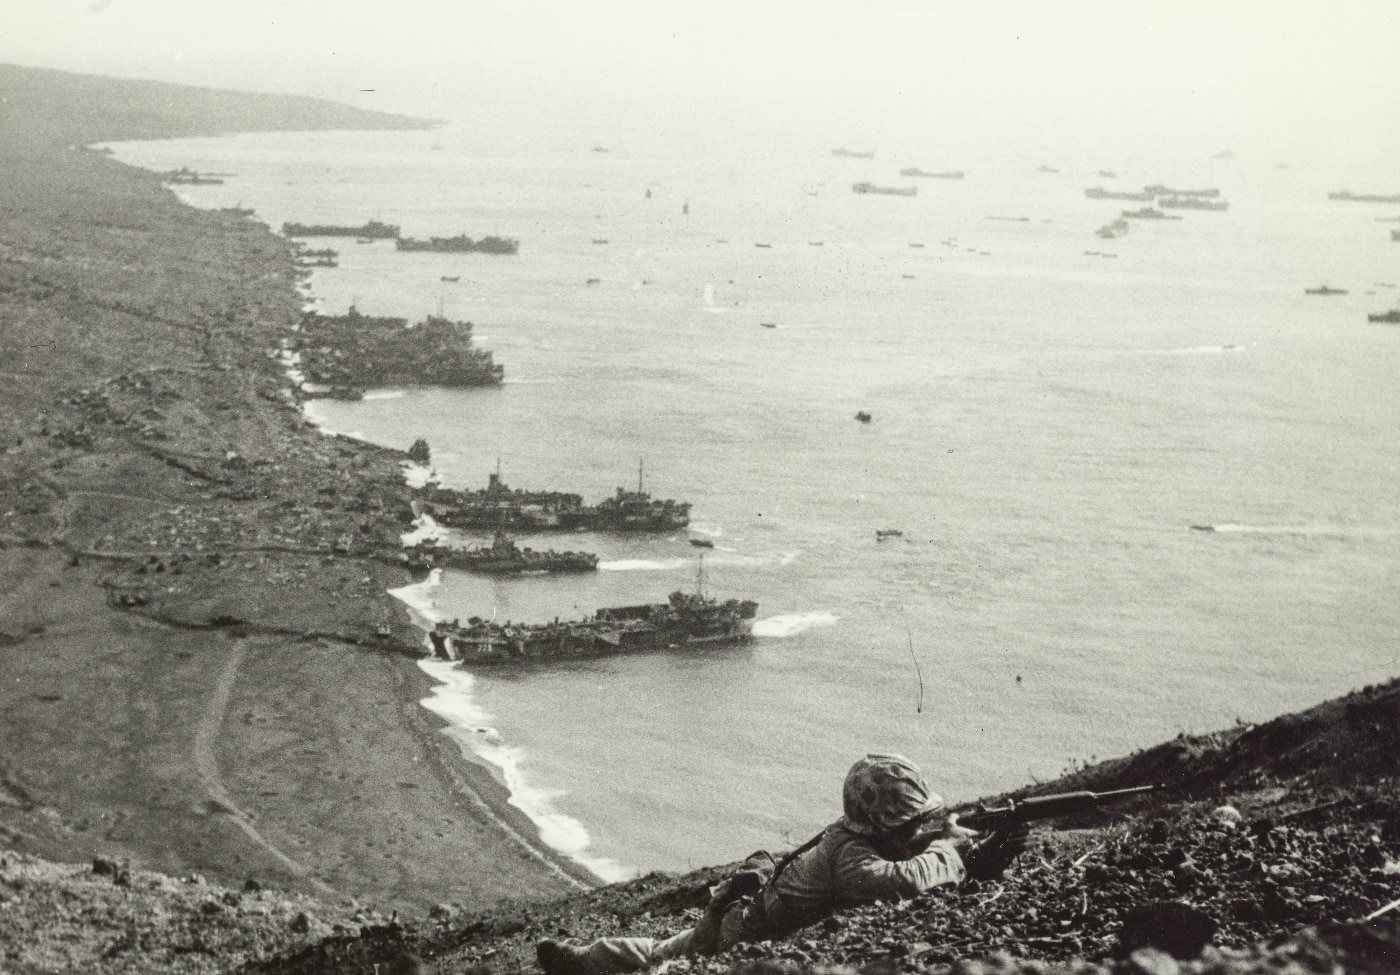 In this digital photograph, a lone Marine holds a M1 Garand rifle in a prone position as he protects the flank of a United States Marine Corps patrol making its way up the hill behind him. The Battle of Iwo Jima was largely the plan of United States Navy Admiral Chester W. Nimitz and carried out by the 4th Marine Division and 5th Marine Division. 